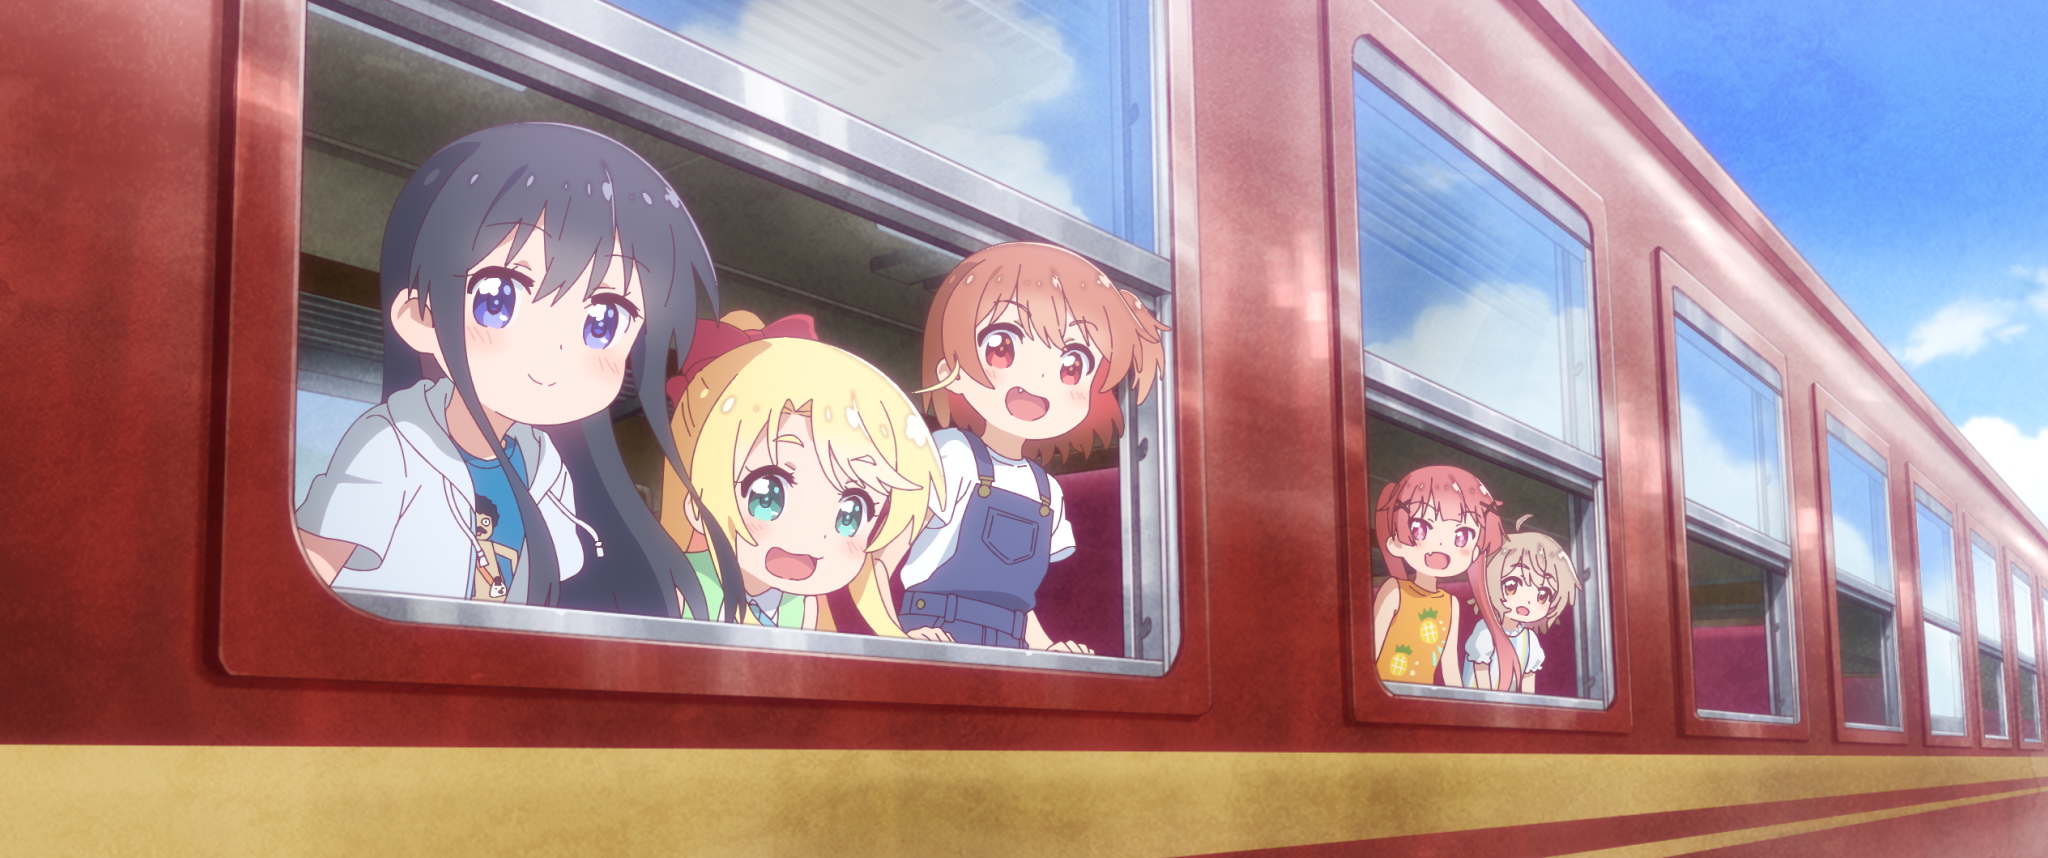 Crunchyroll - WATATEN!: An Angel Flew Down to Me Anime Film Heralds October  Arrival with Main Trailer